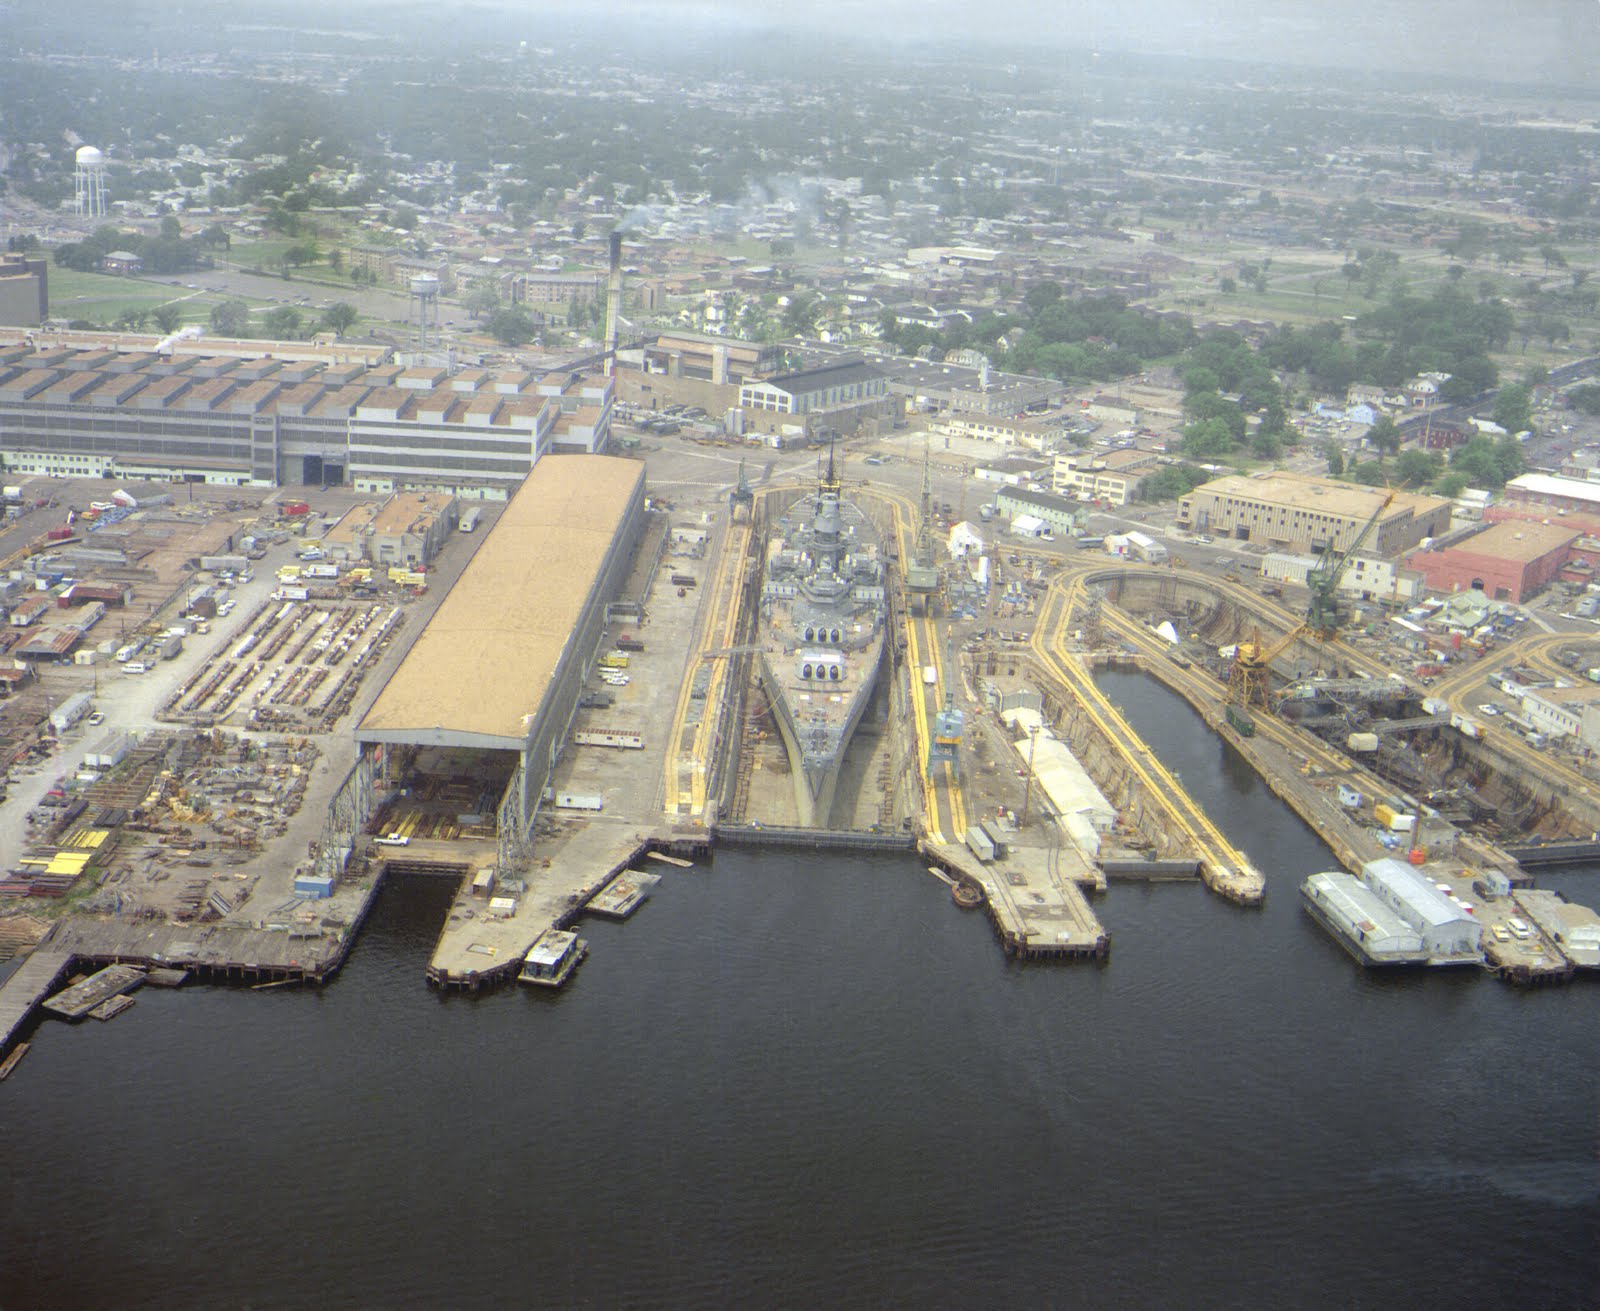 USS Iowa (BB-61) in Dry dock Number 4 at Norfolk Naval Shipyard-Portsmouth - May 2 1985.jpg